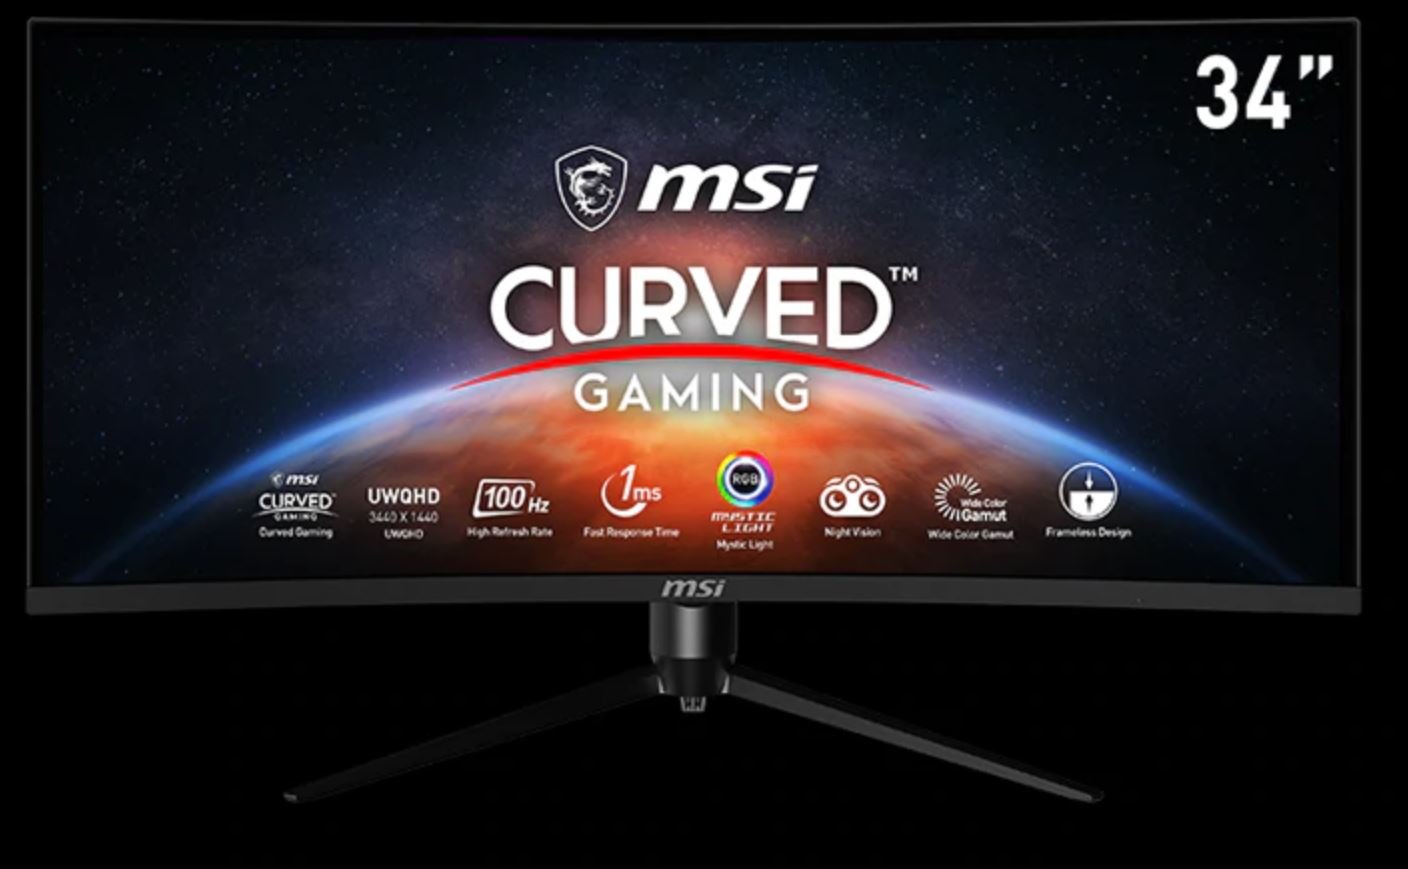 Curved gaming monitor MSI MSI Launch Curved Gaming Monitor